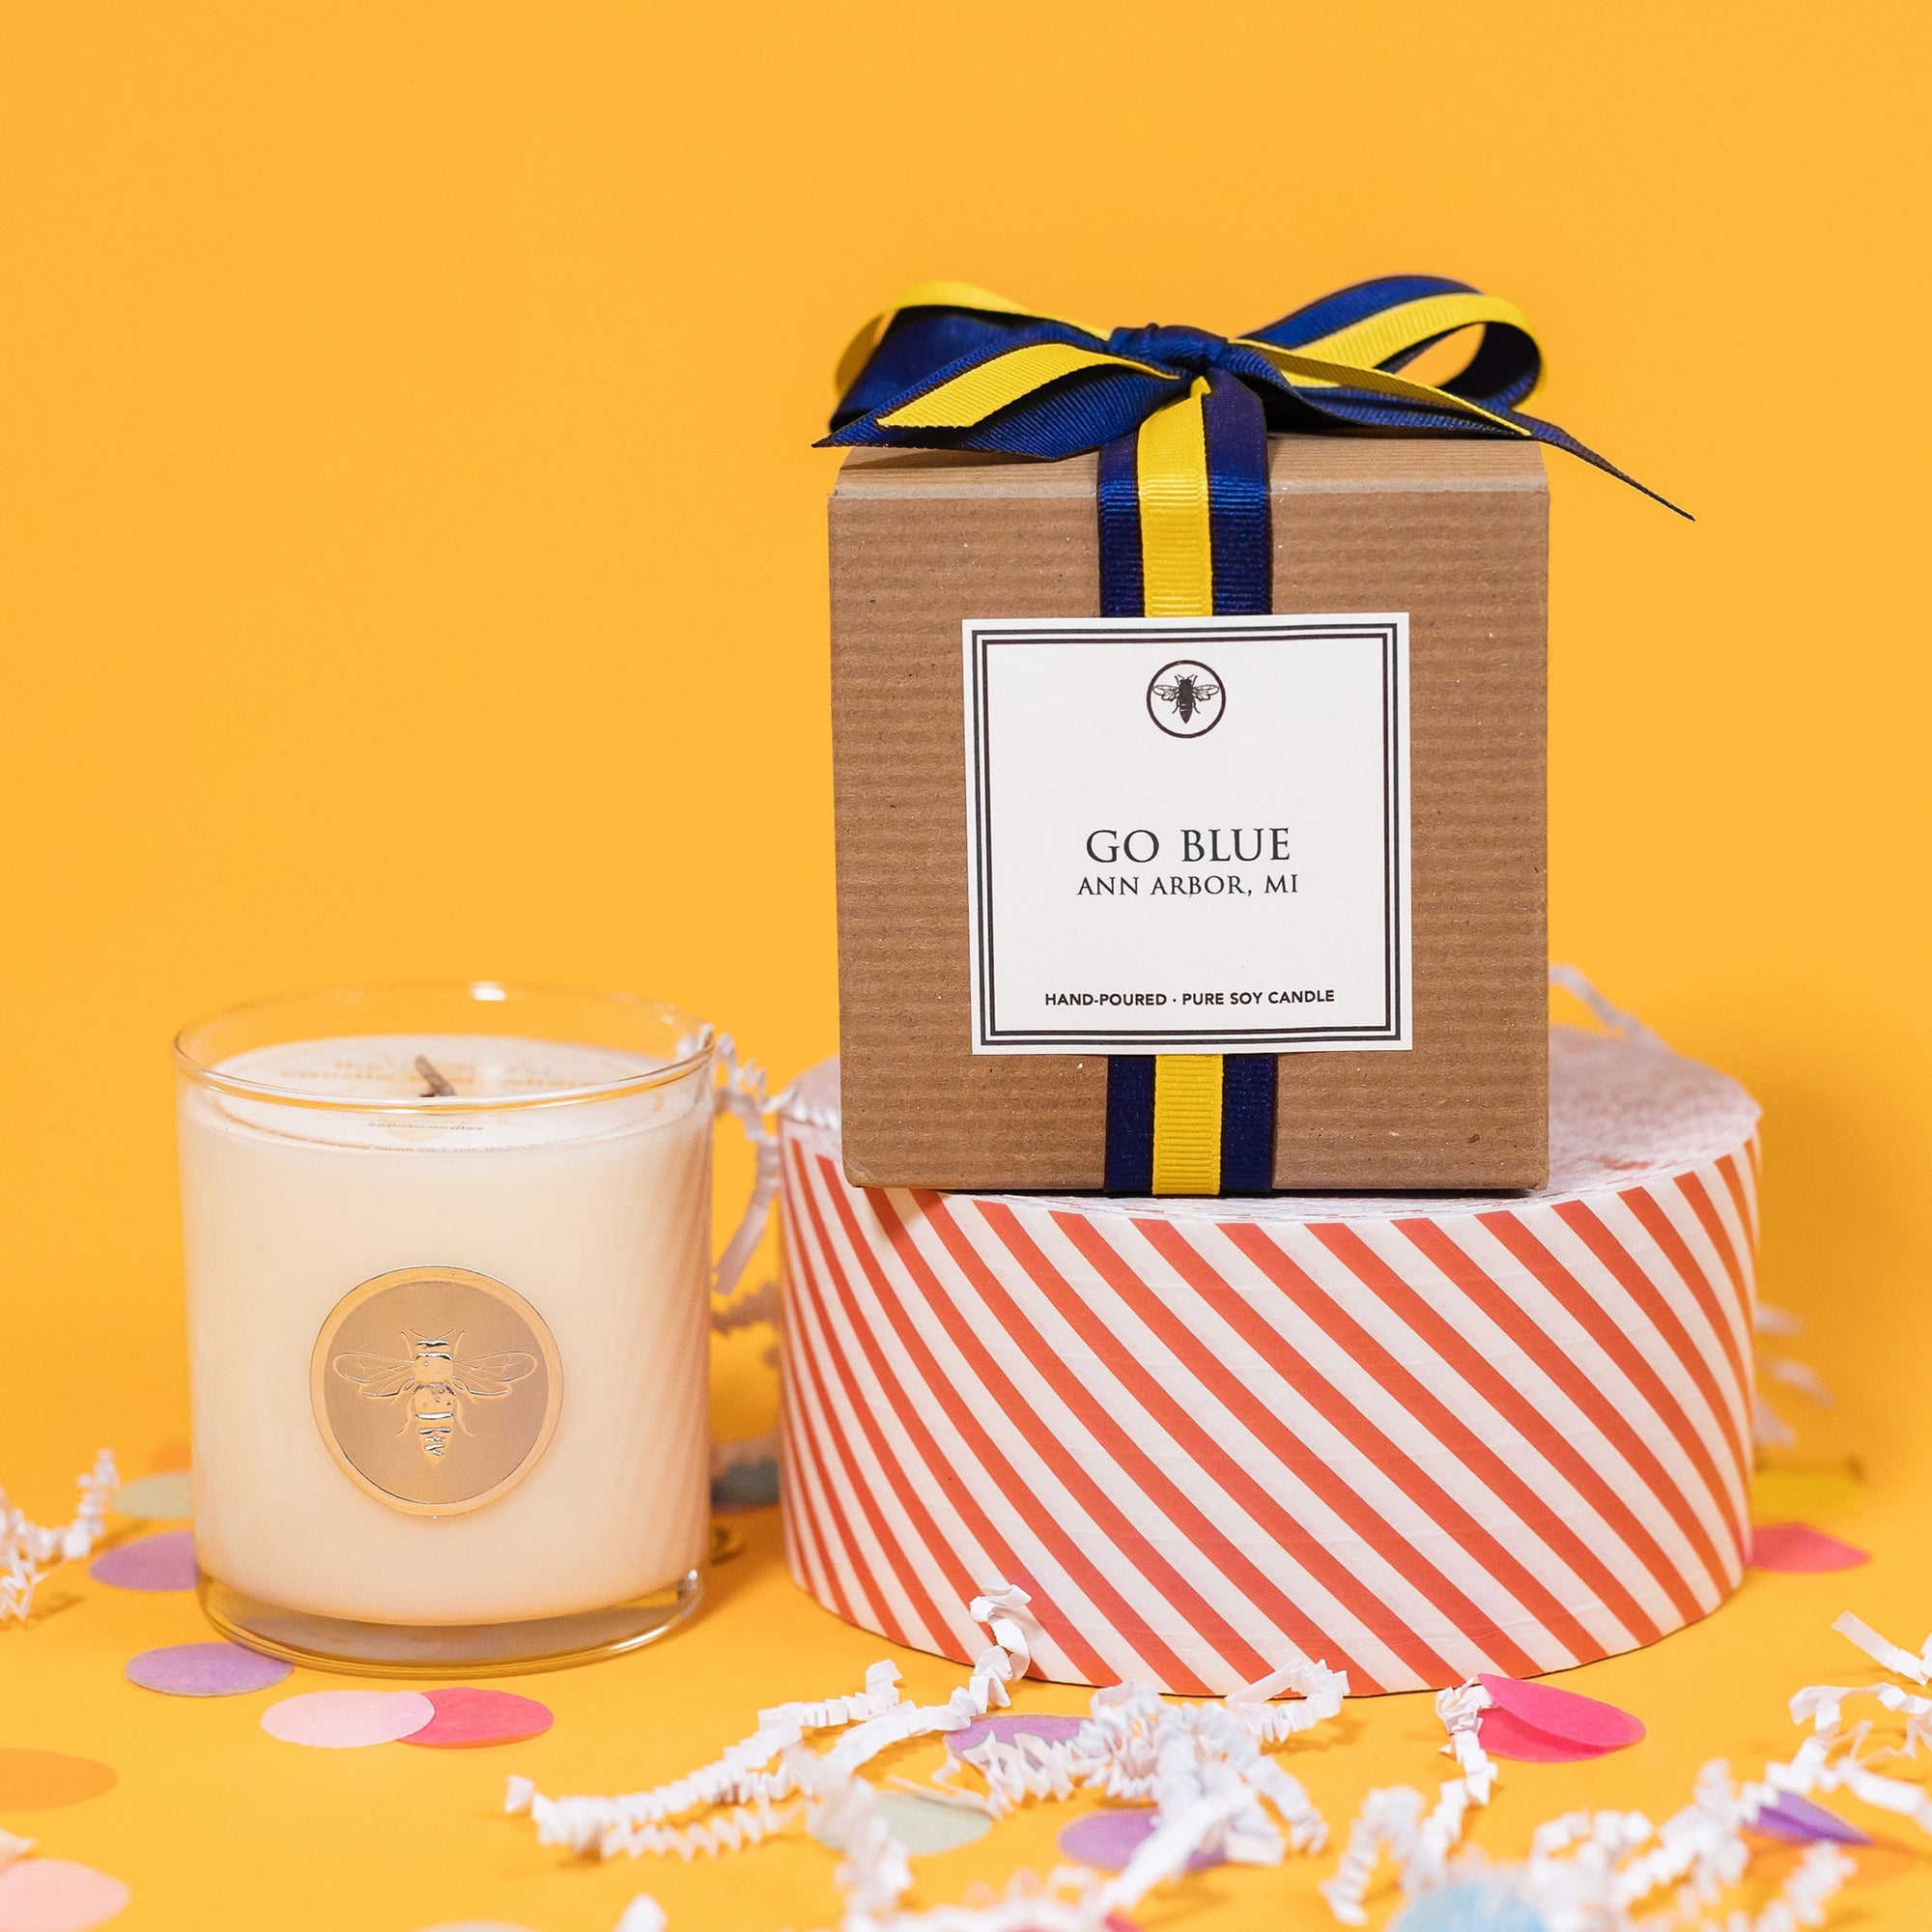 On a sunny mustard background is a candle with a box and white crinkle with big, colorful confetti scattered around. The clear glass candle has a gold foil round label with an illustration of a bee on it. There is a kraft box with yellow and navy striped ribbon tied at the top and on the front is a square white label that says "Go Blue Ann Arbor Mi" and it sits atop a red and white striped packing tape. The candle is a "Hand-poured, pure soy candle."